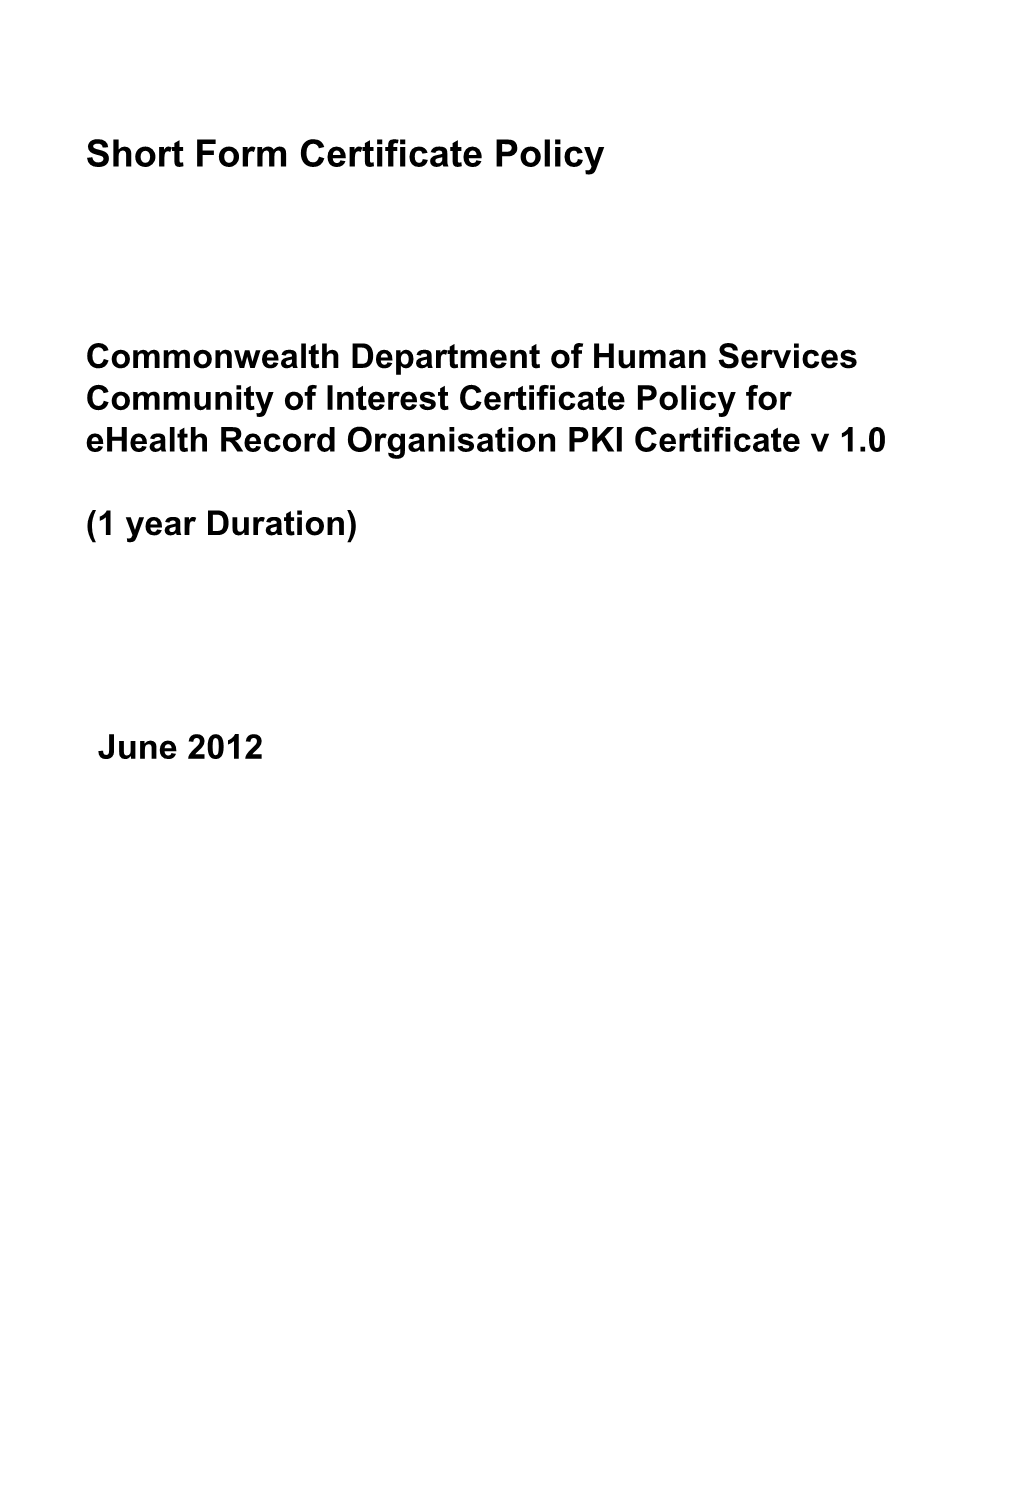 Commonwealth Department of Human Services Community of Interest Certificate Policy For